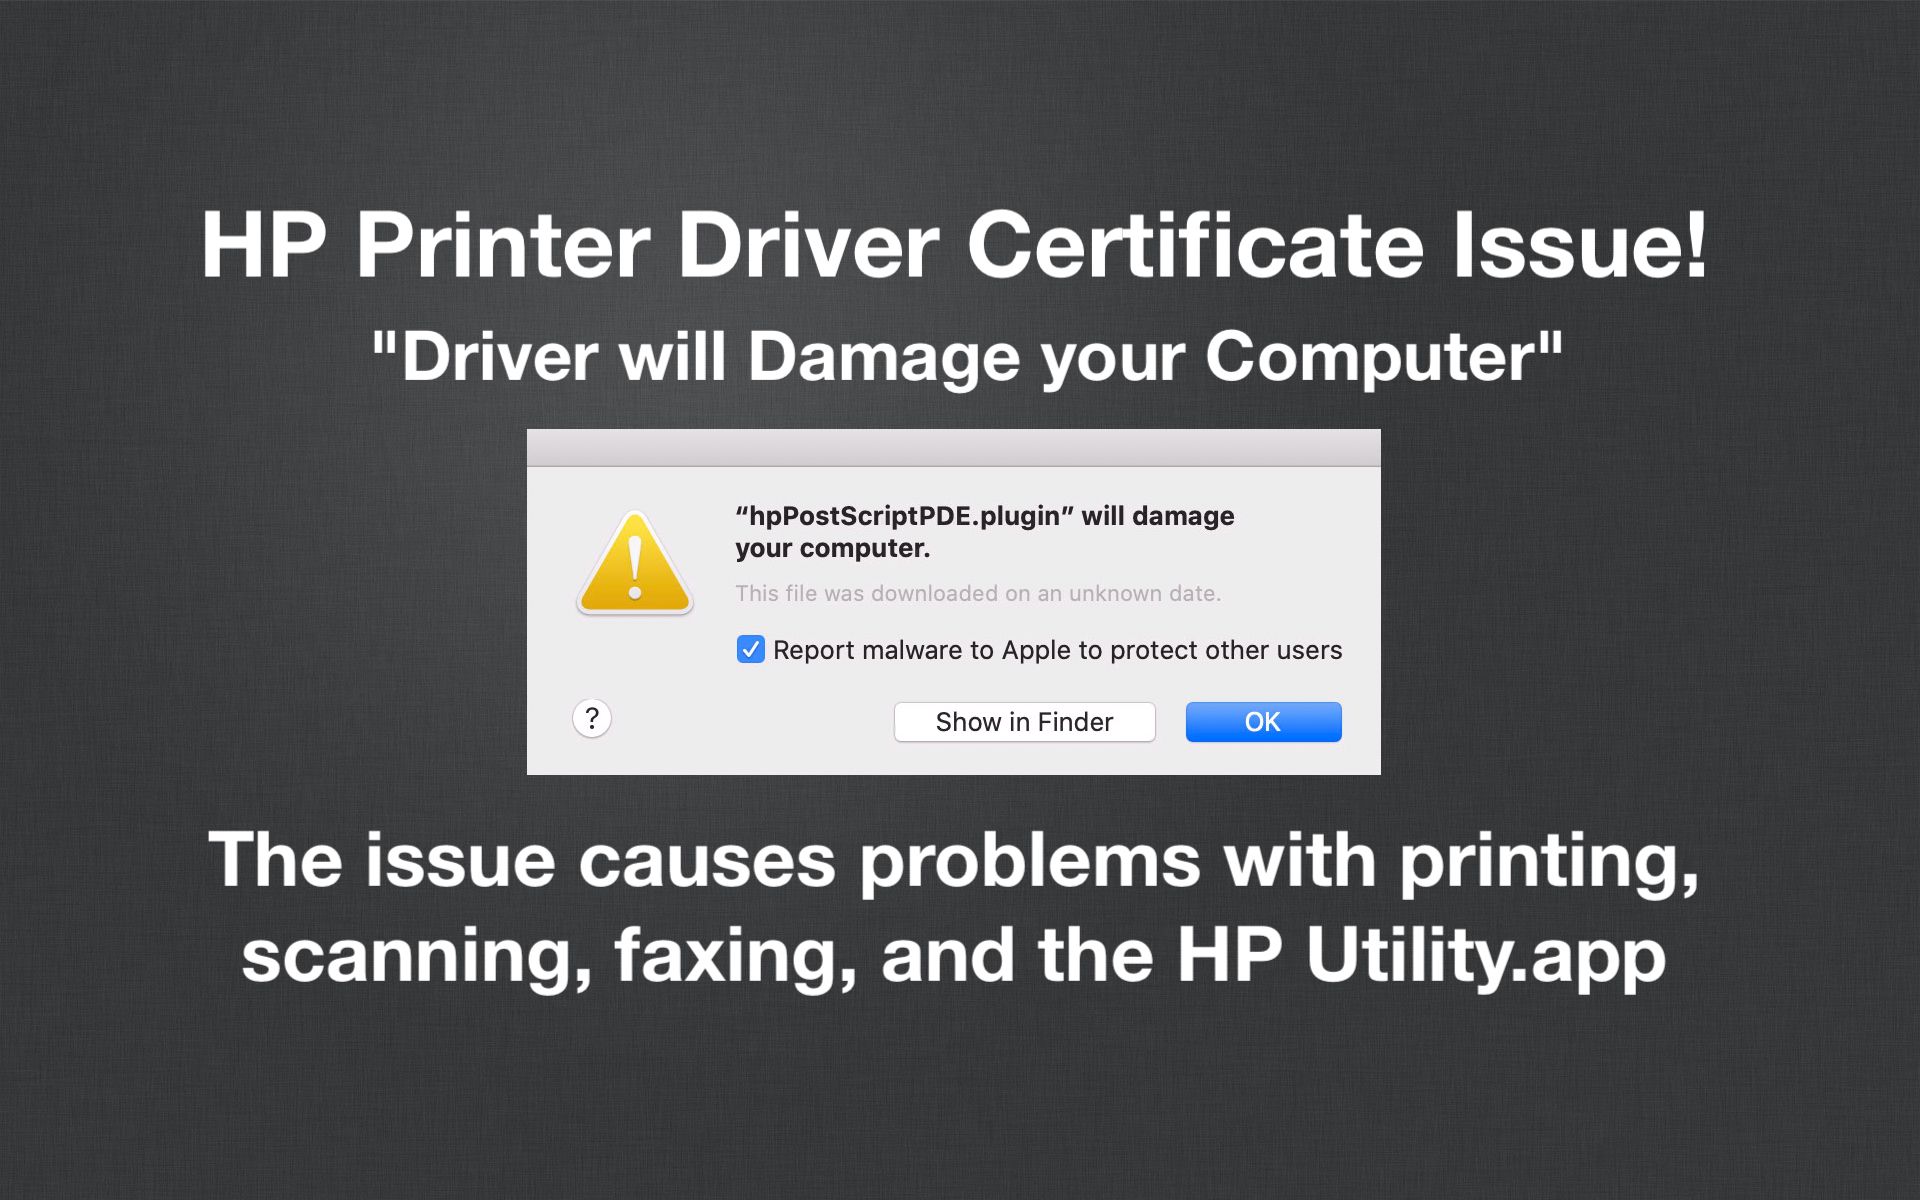 HP Printer Driver Issue! "Driver will Damage